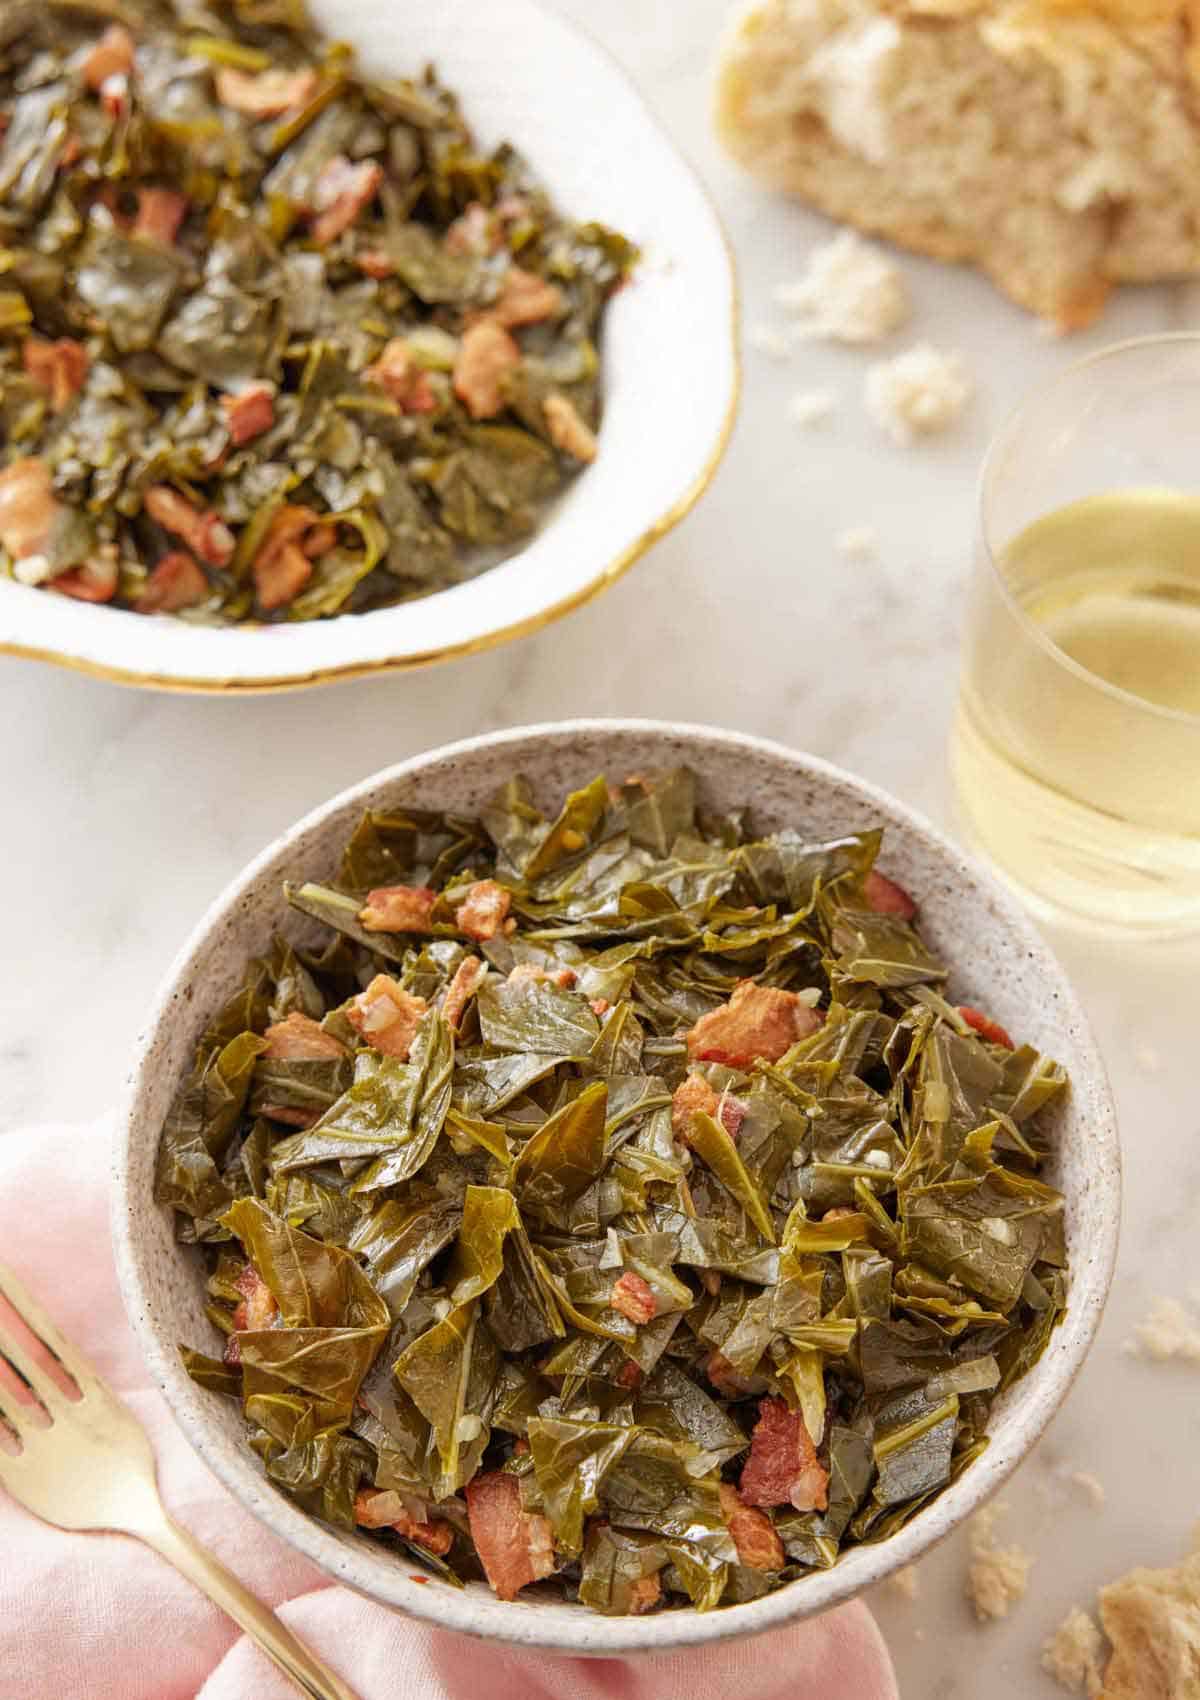 A bowl of collard greens with a serving platter and glass of wine in the background.